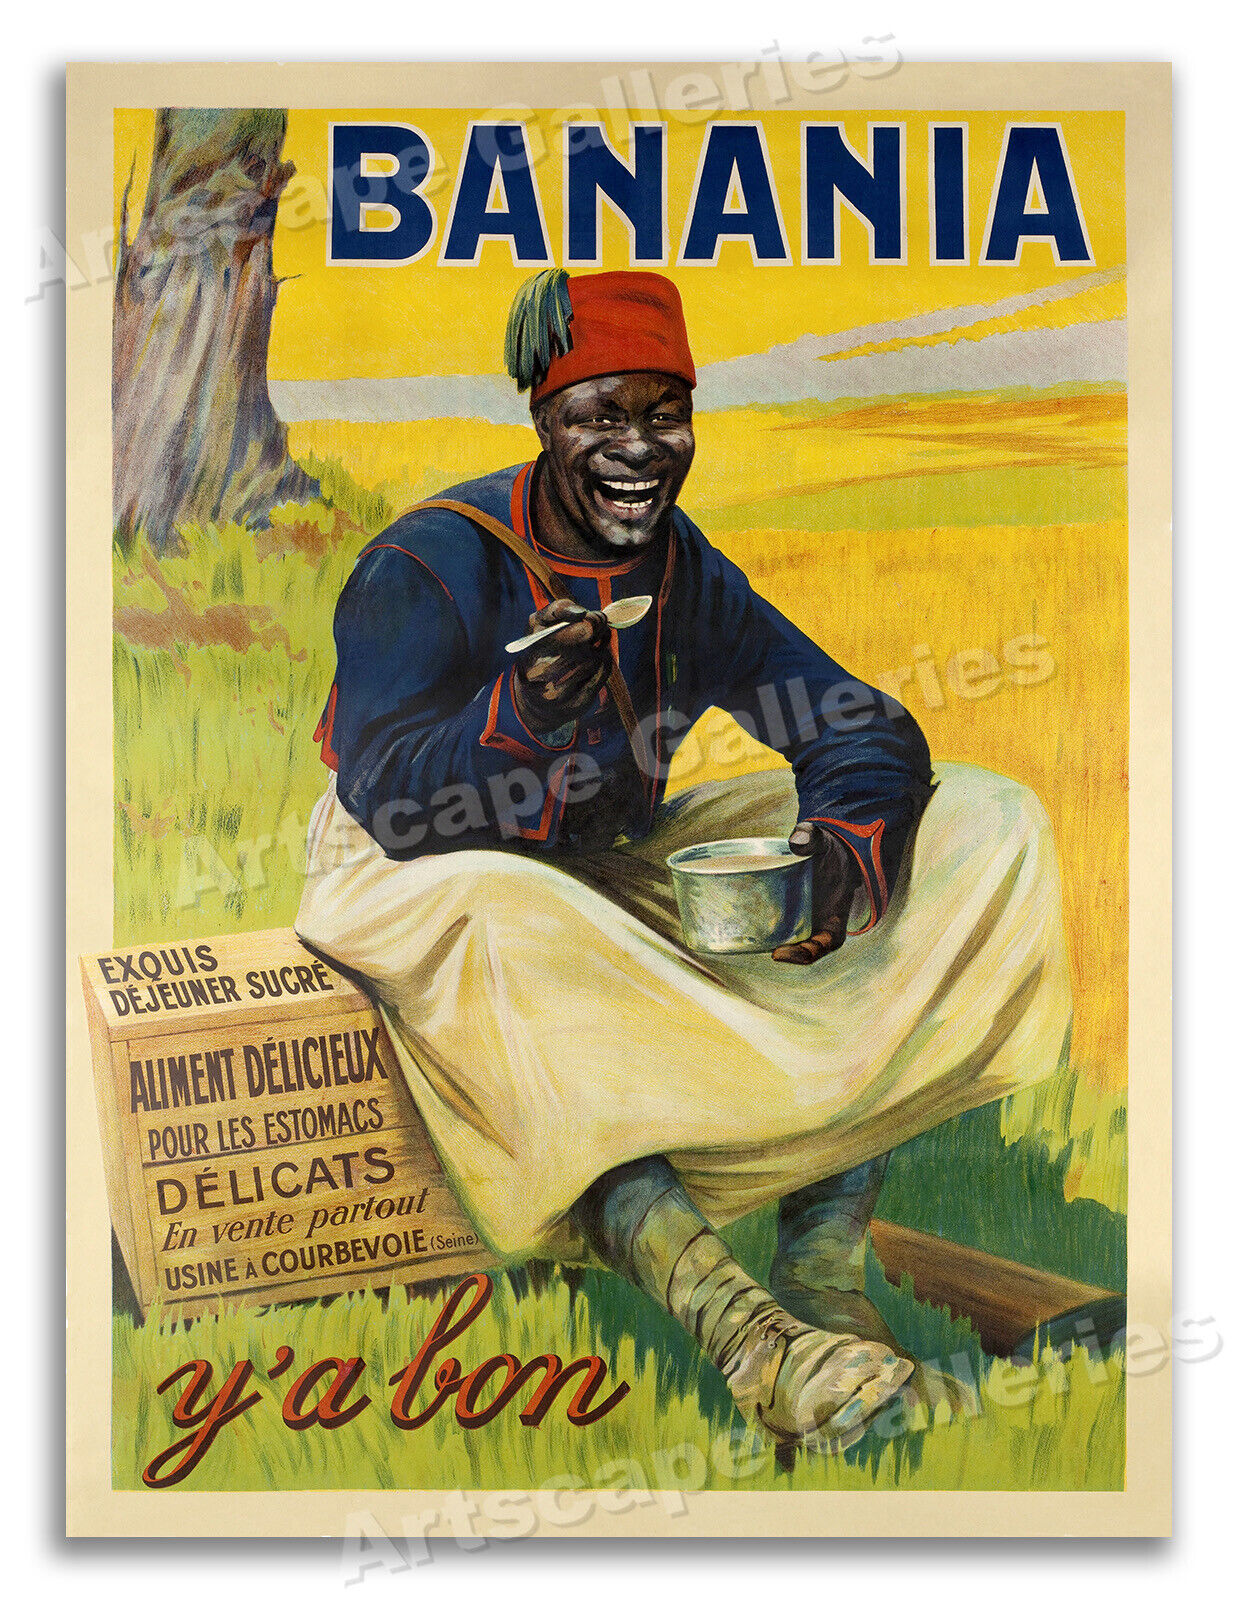 Banania 1915 Vintage French Breakfast Food Advertising Poster Art - 18x24